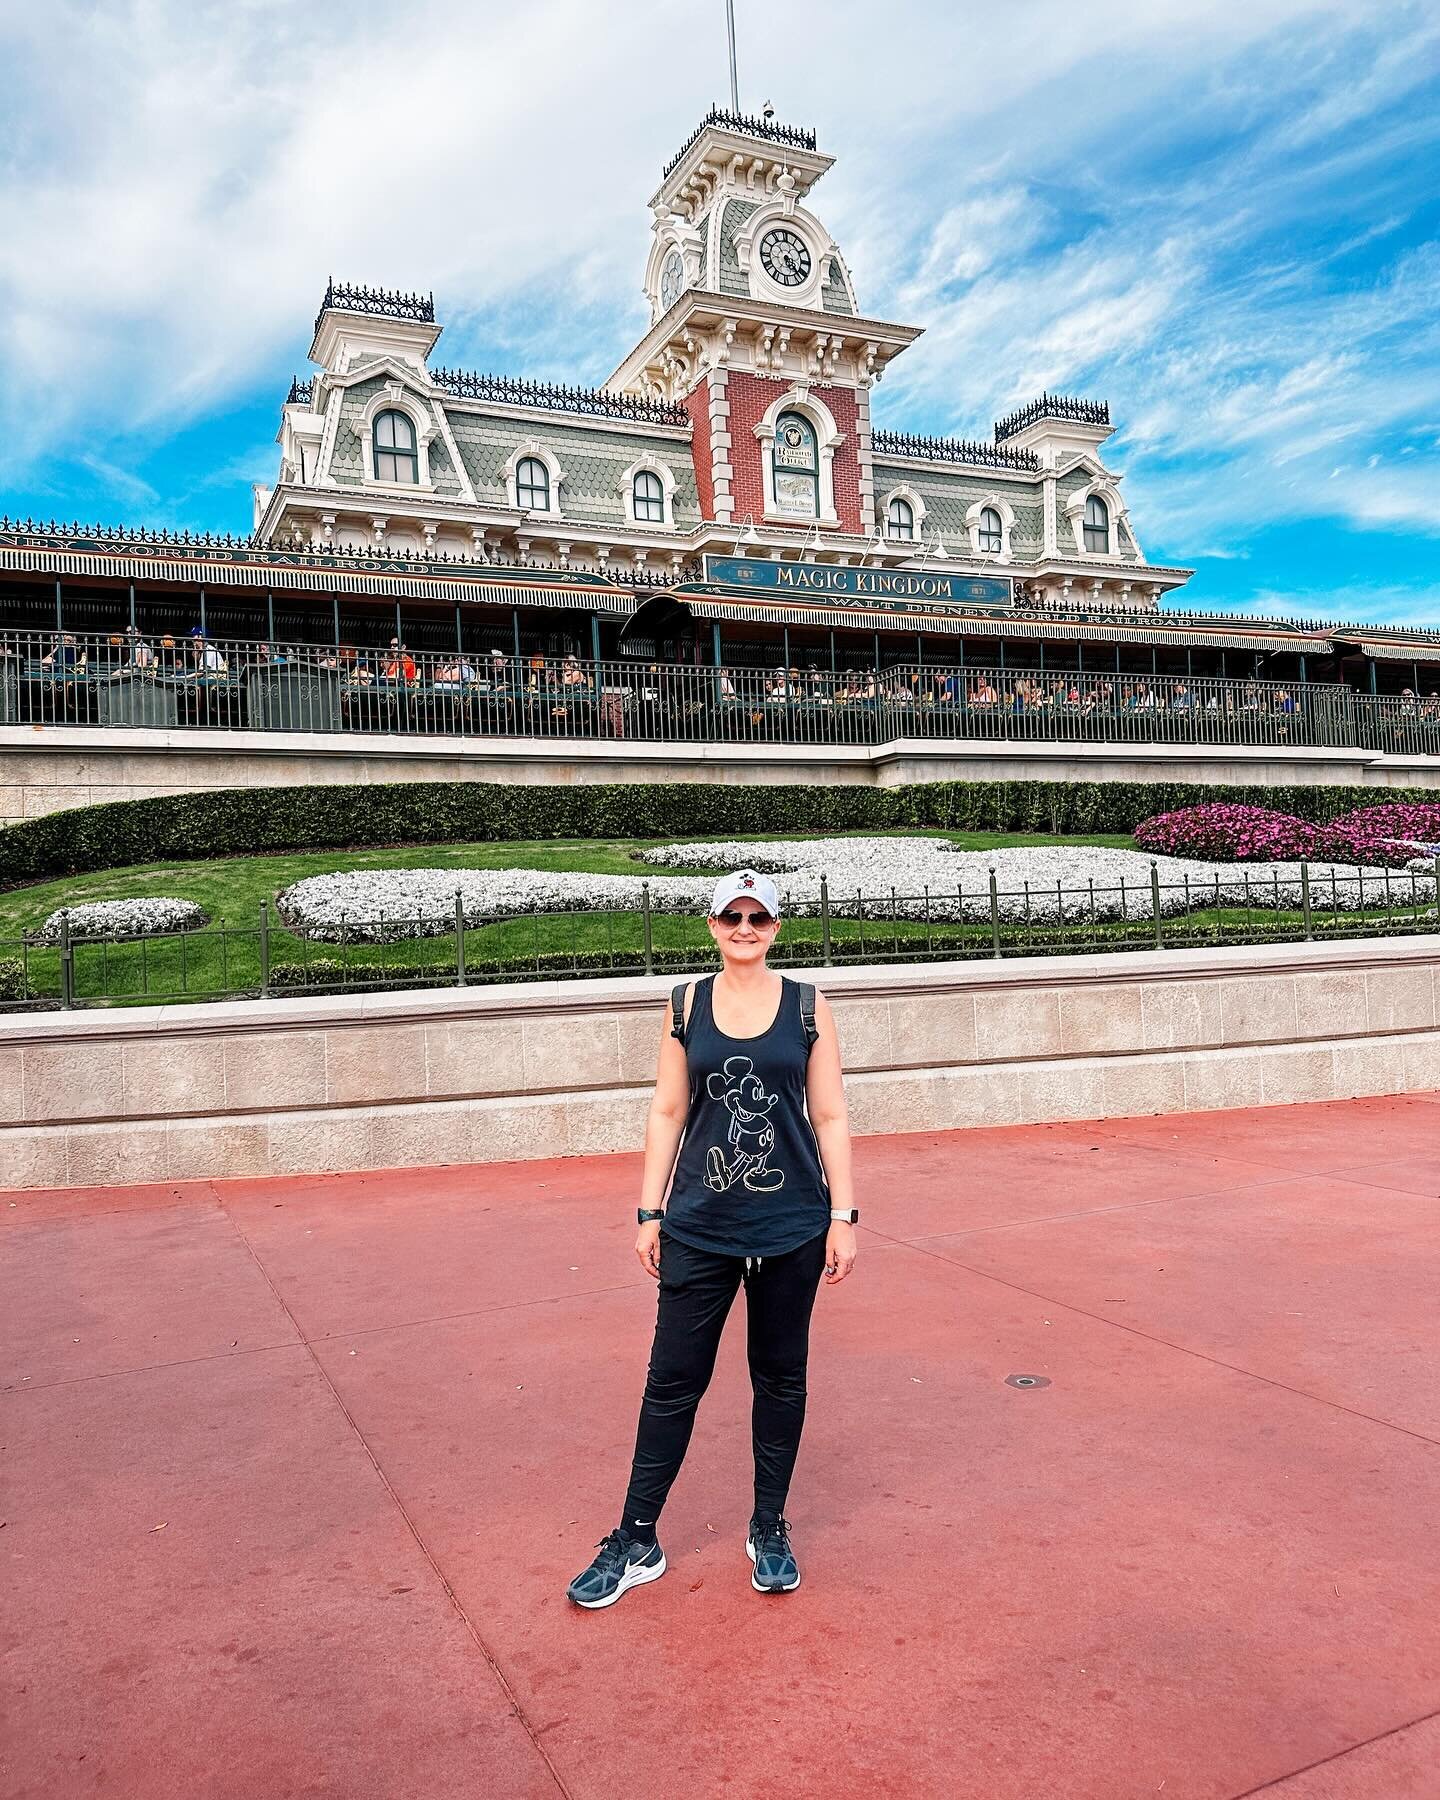 Recap of our magical days at @waltdisneyworld 

We went to magic kingdom, Epcot and Animal Kingdom and feel like there is so much more to still see and do 😅

Until next time 🤩

#disneyworld #disneytime #disneylife #disneygram #disneyglutenfree #dis